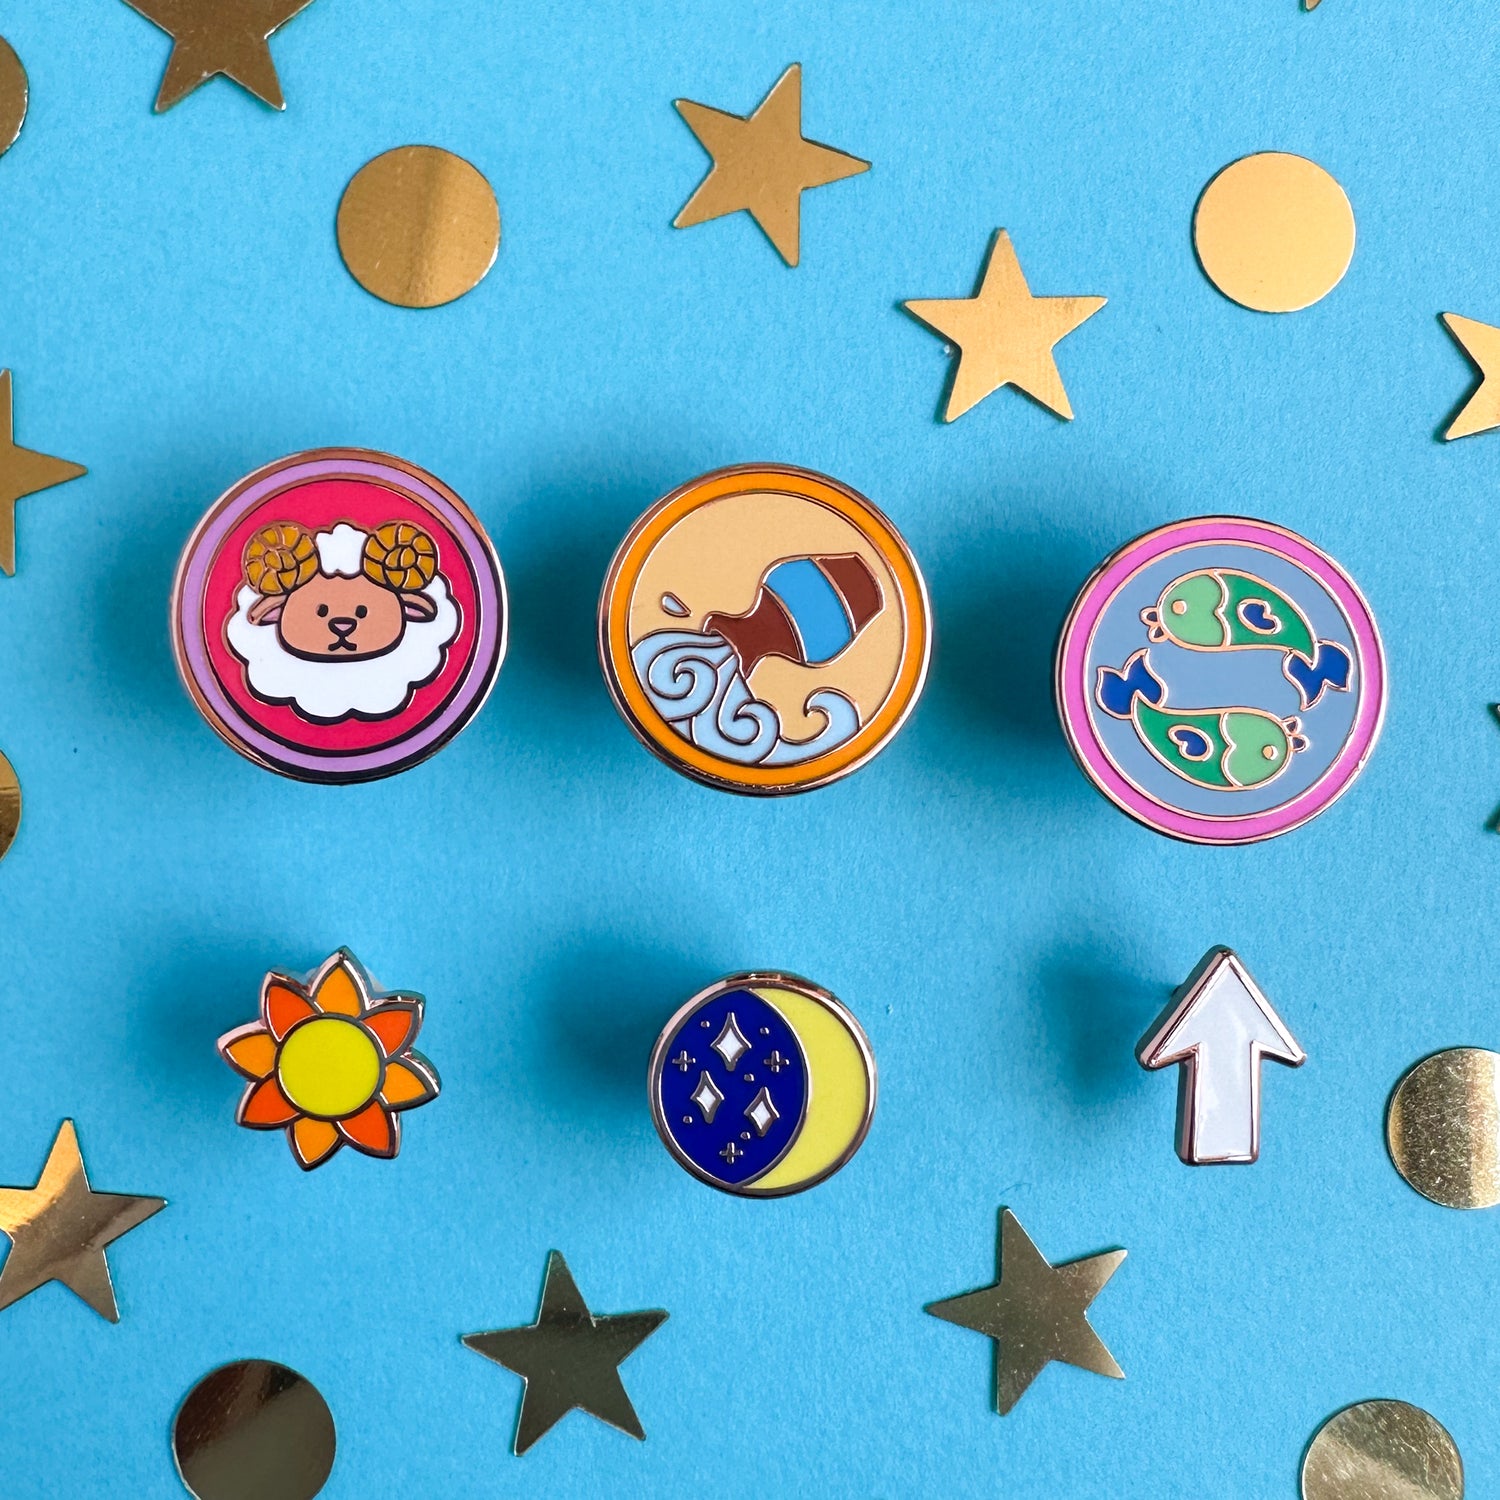 A set of six enamel pins, three are circles with cute illustrations representing zodiac signs. and the other three are shaped like a sun, moon, and rising arrow. The pins are on a blue background strewn with gold confetti shaped like stars and circles.